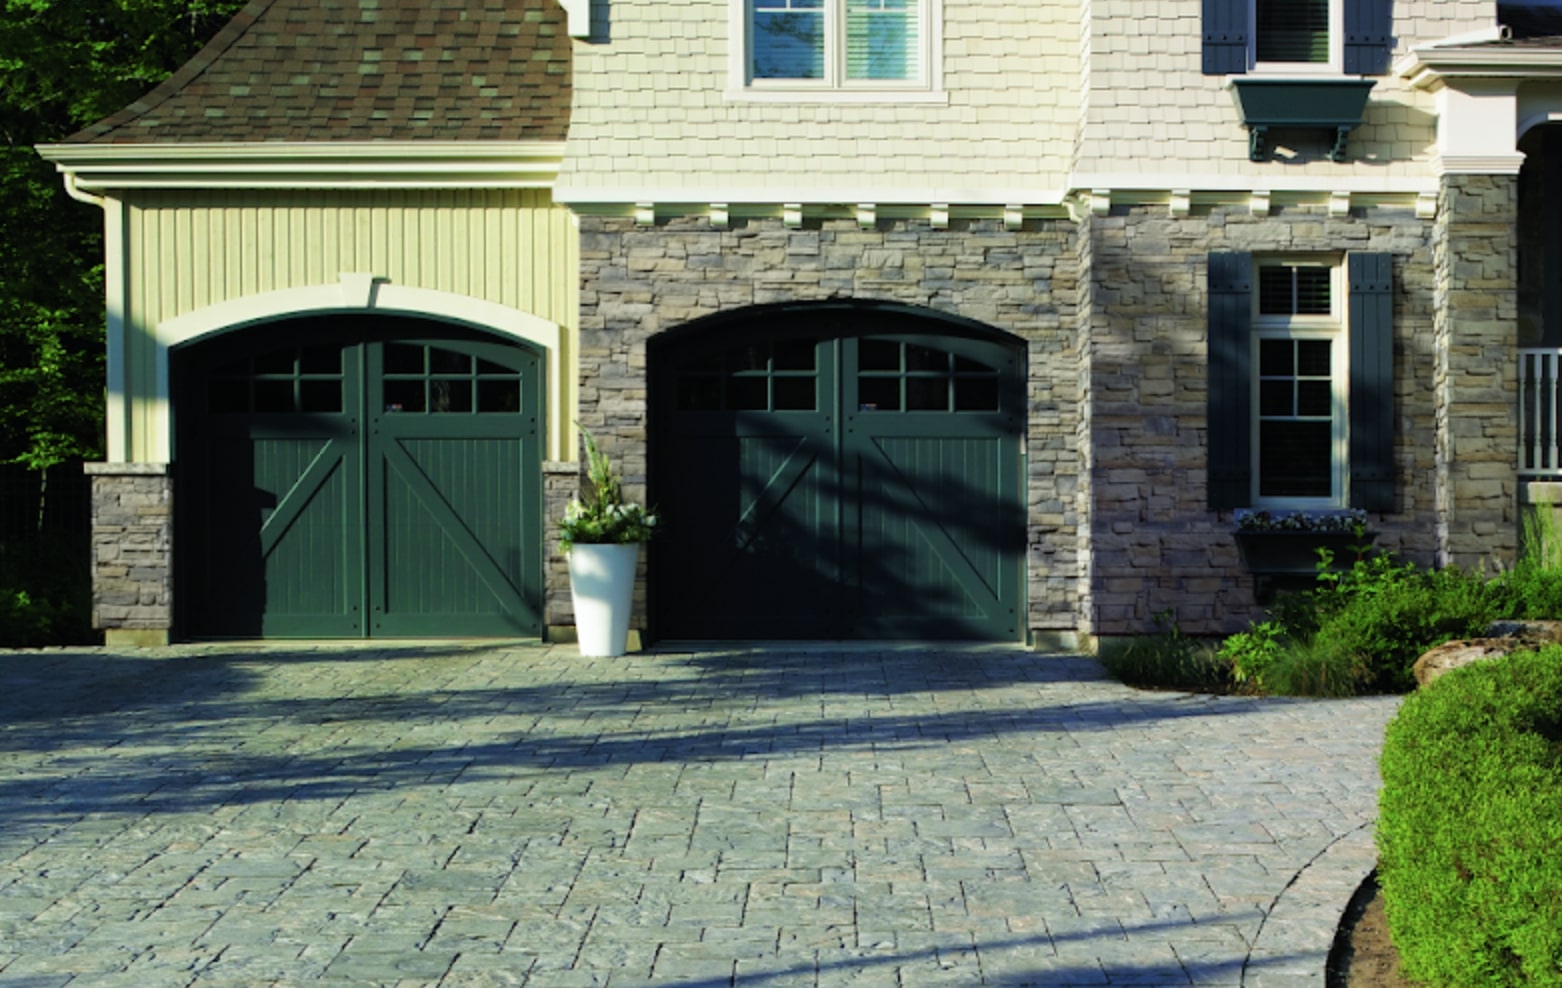 4 Garage Exterior Makeover Ideas To Boost Curb Appeal - Beonstone